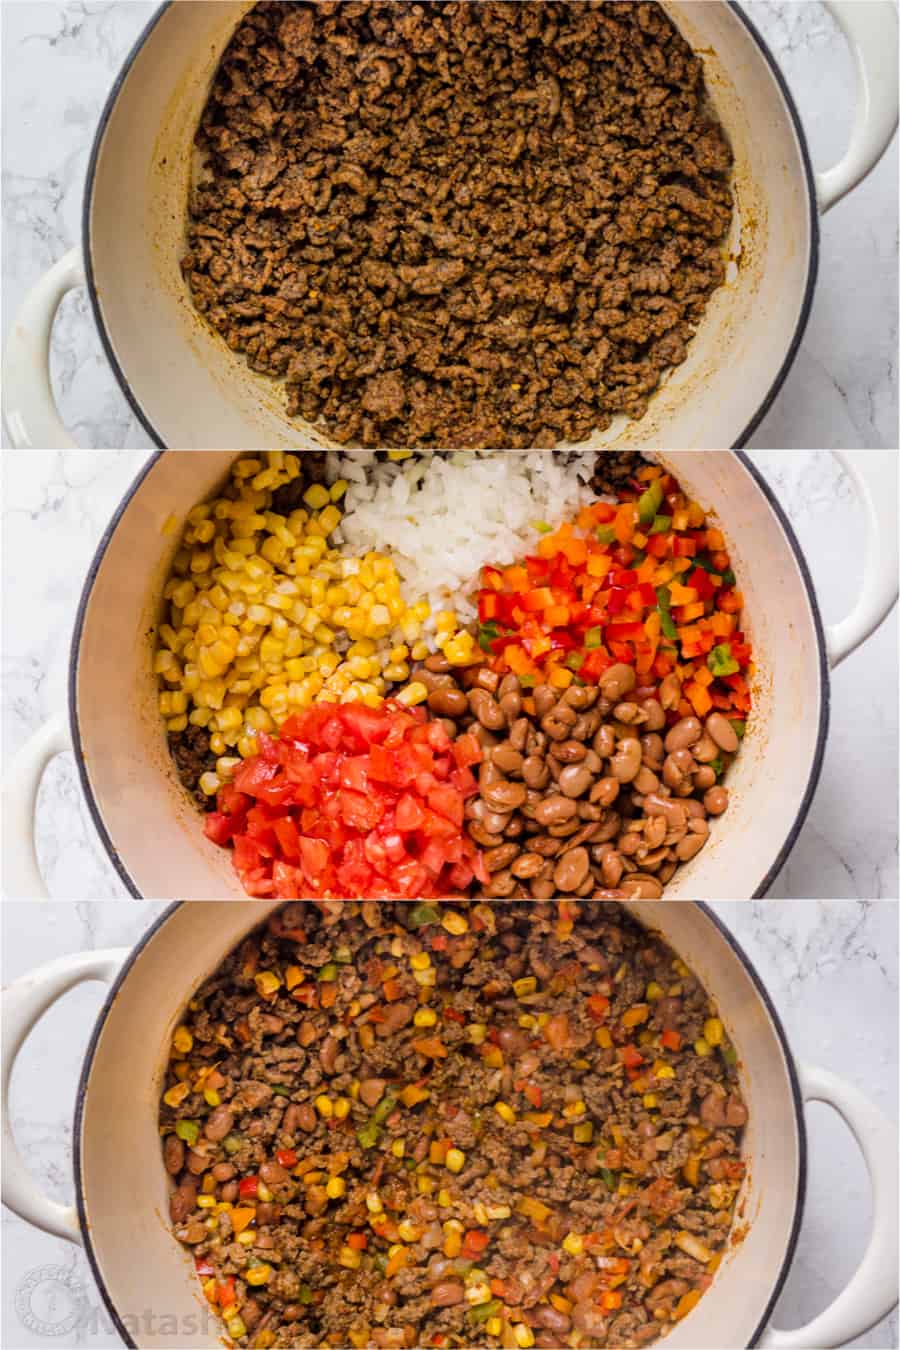 Step-by-step instructions on how to make taco soup